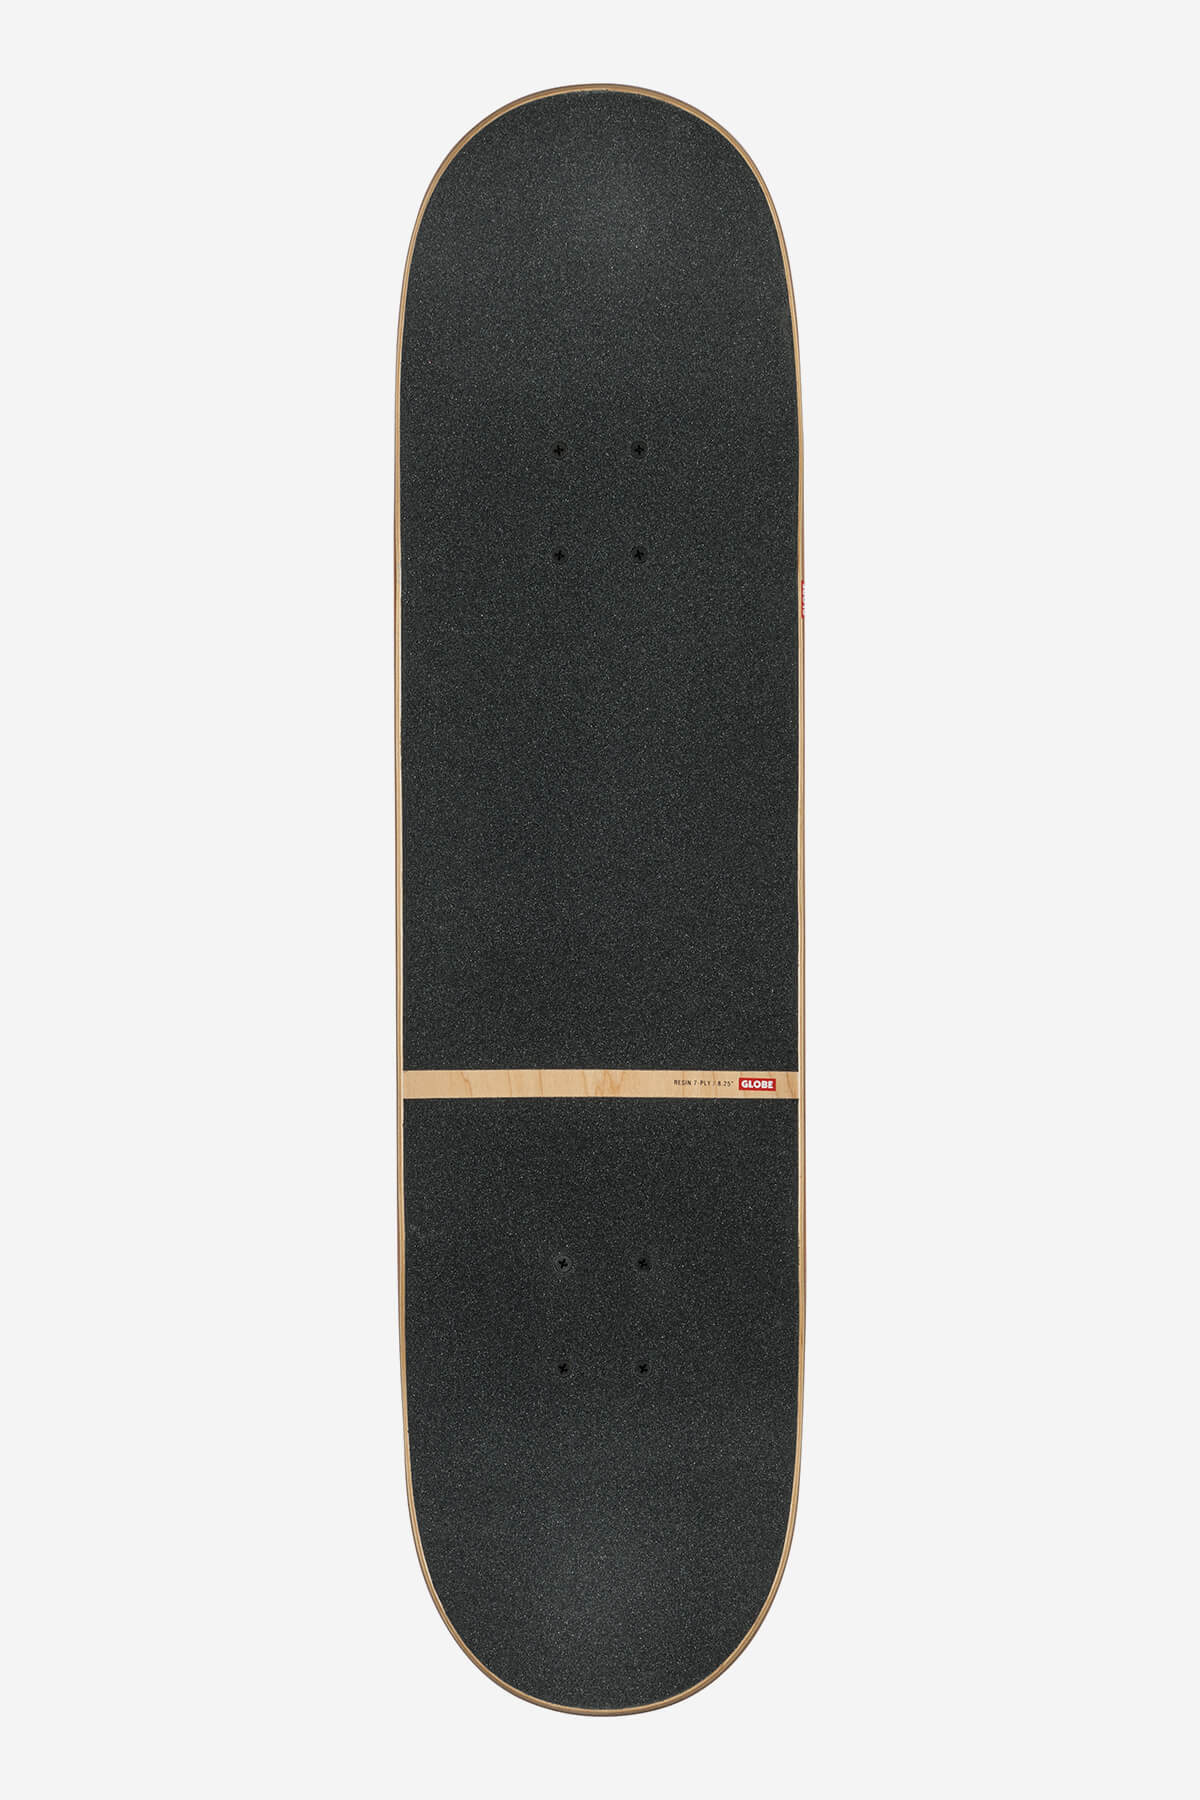 g2 rapid space asteroid 8.25" skate completo